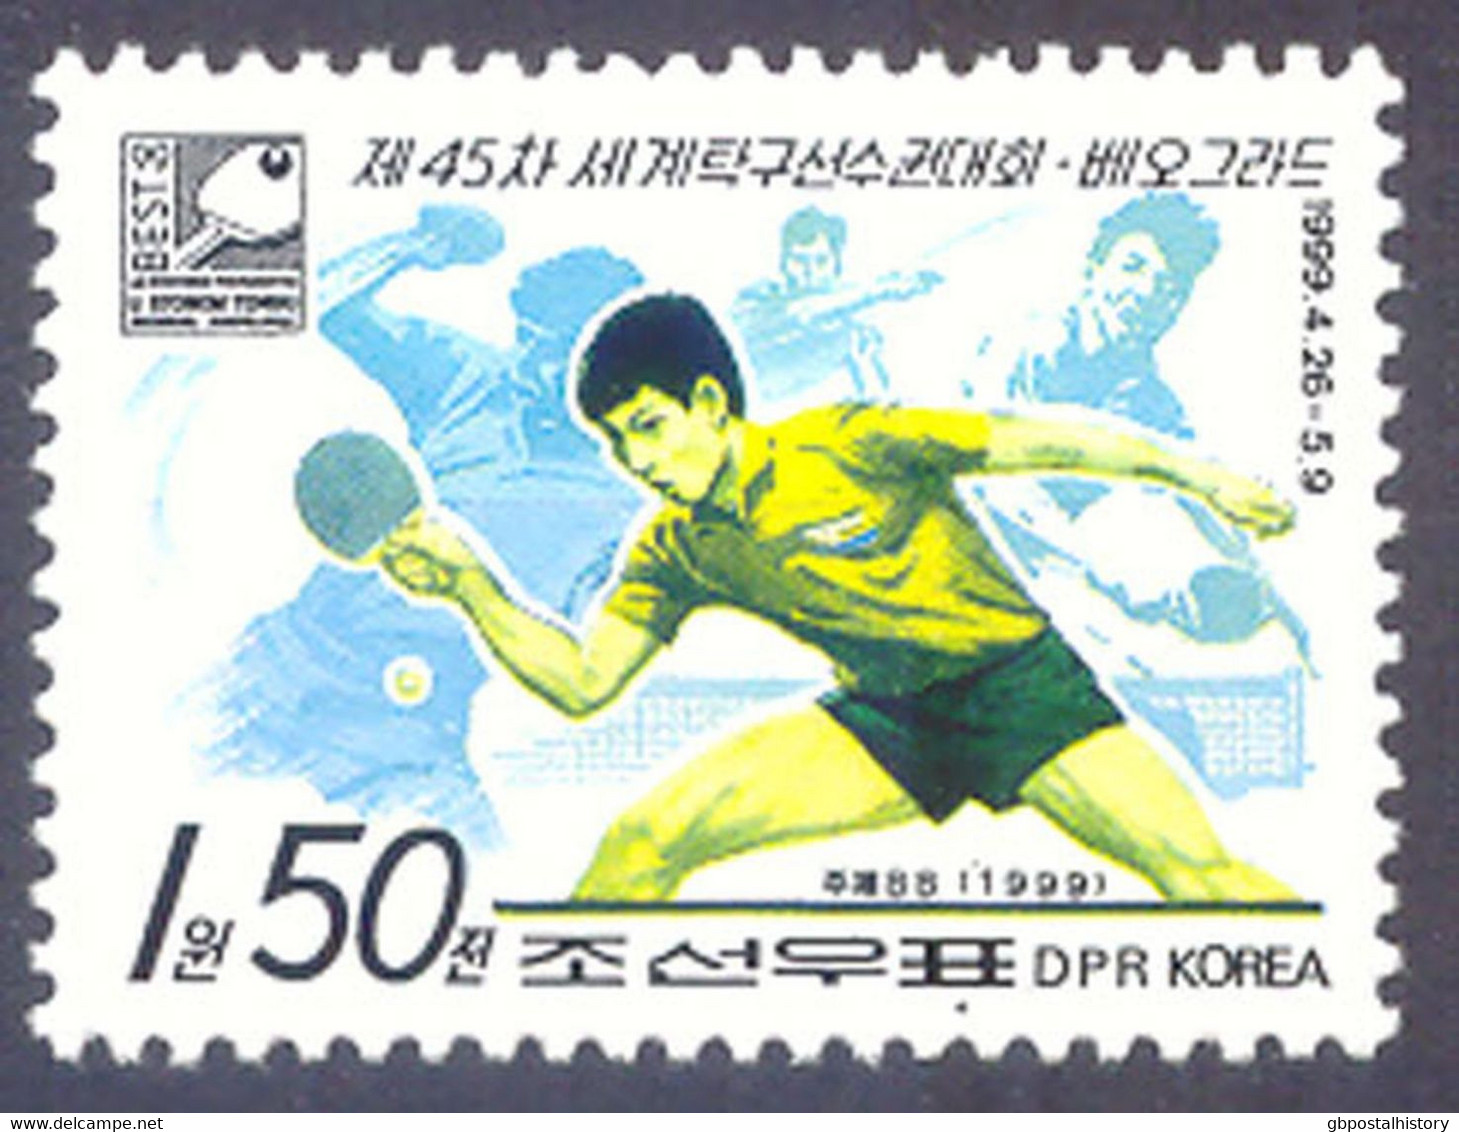 NORD-KOREA 1999, 1 W. 50 Ch. Table Tennis, Very Fine U/M, MAJOR VARIETY: MISSING RED COLOR, Extremely Rare, RRR !!! - Korea, North